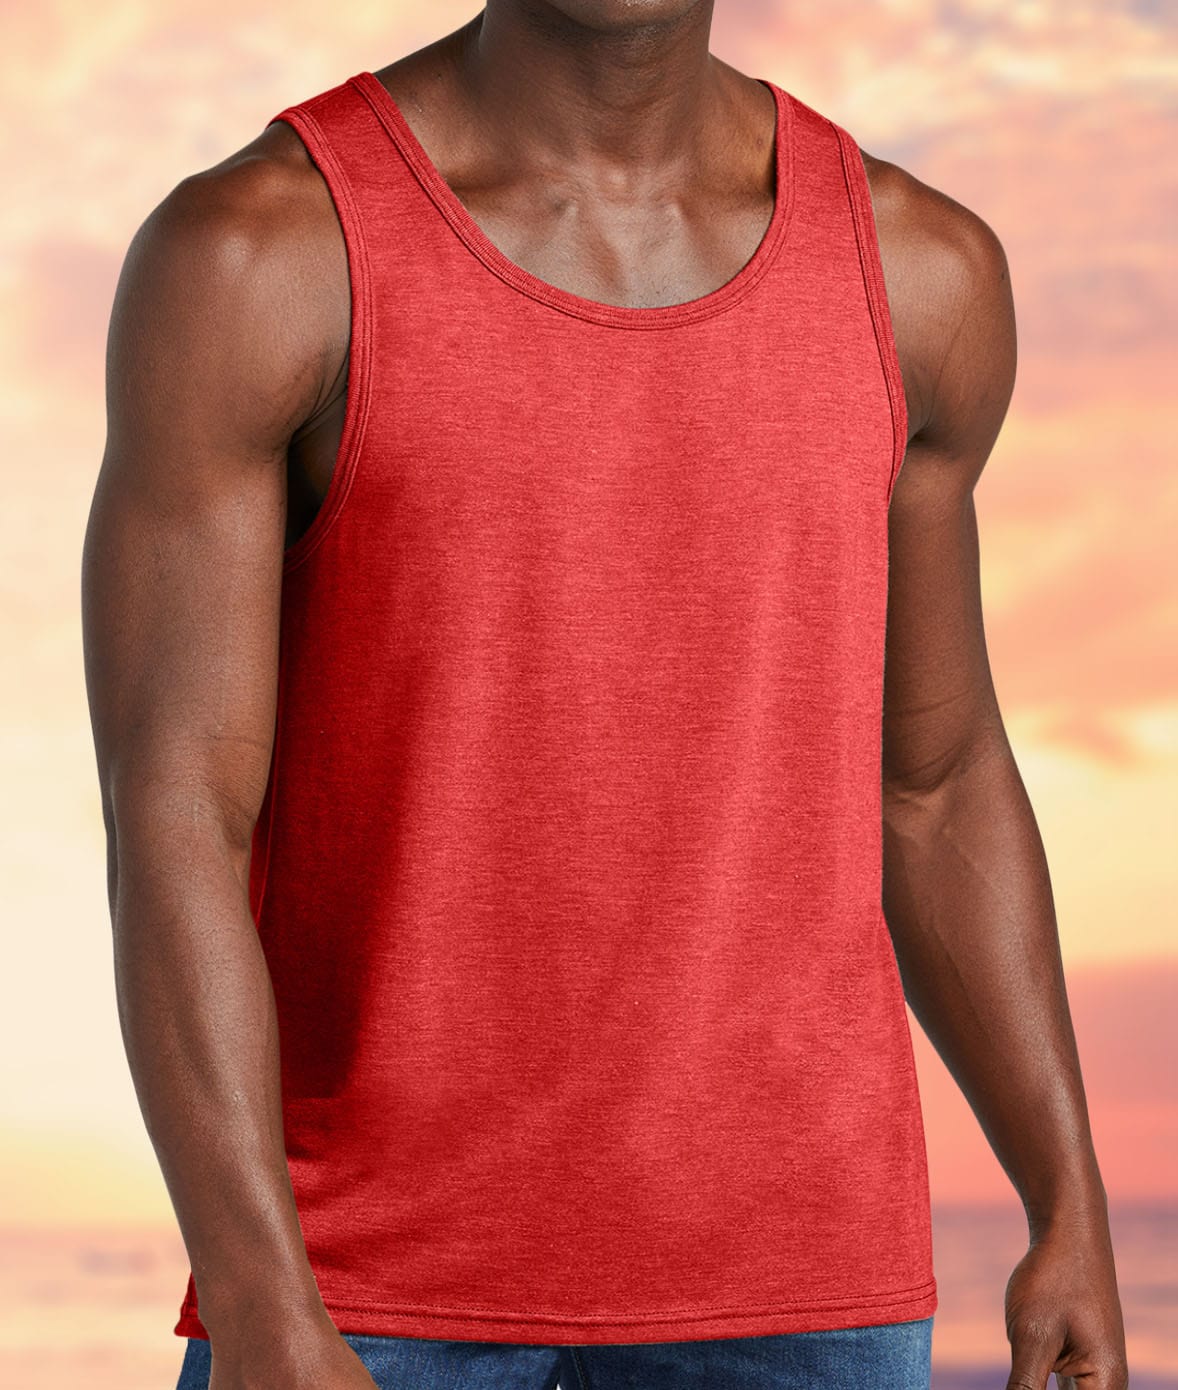 Men's Big Ridiculously Soft Recycled Lightweight Tank Worn by Model